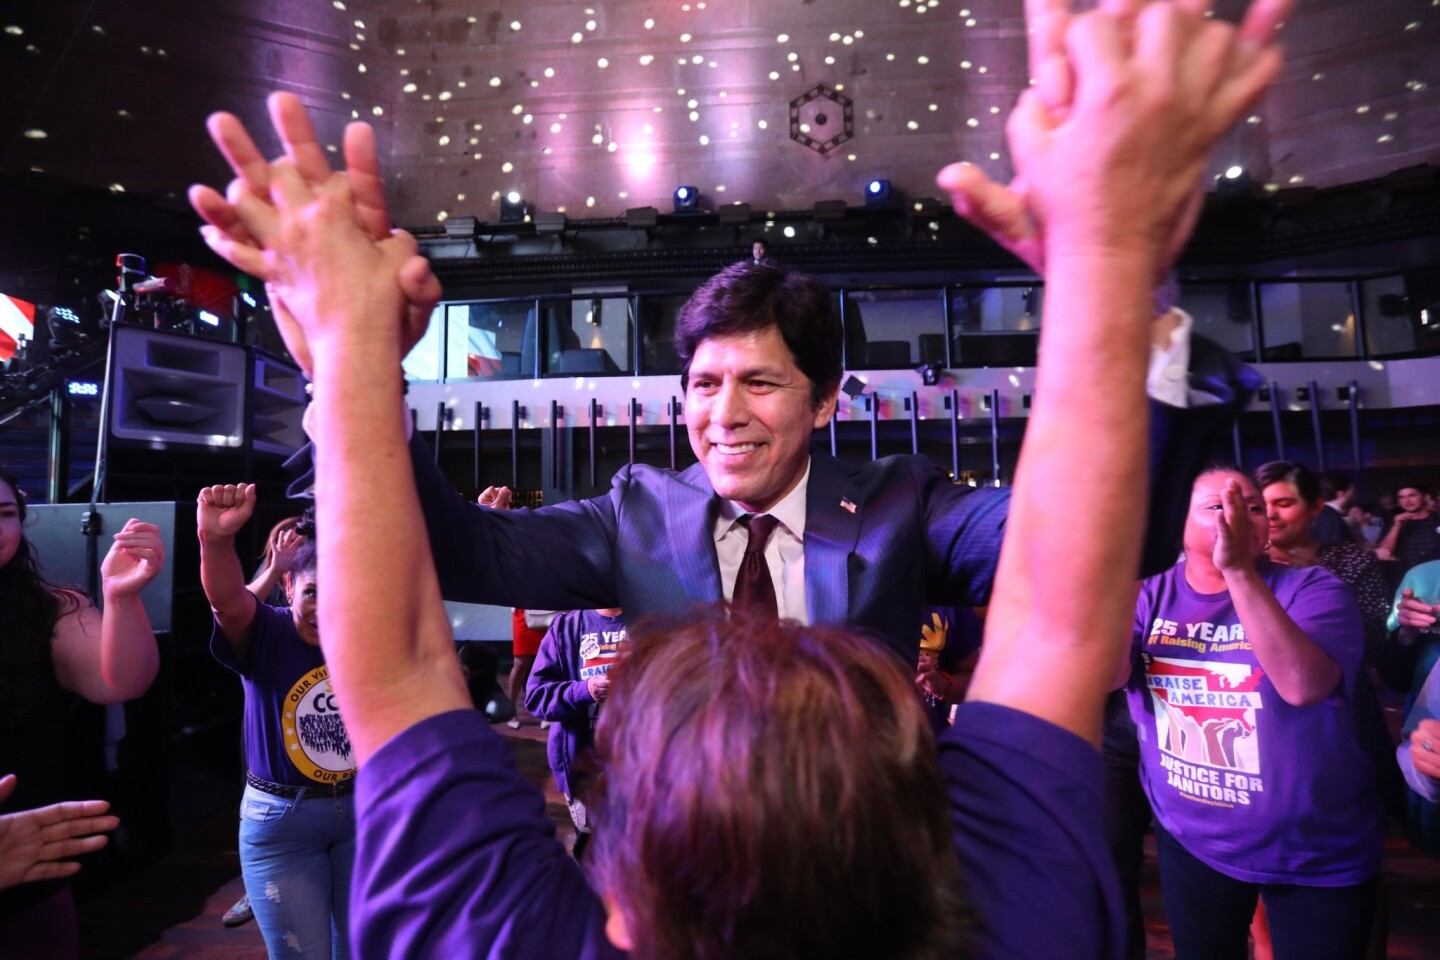 California Senator Kevin de Leon, California Democratic candidate for U.S. Senate, dances with supporters after giving his speech on election night at The Exchange in downtown Los Angeles.